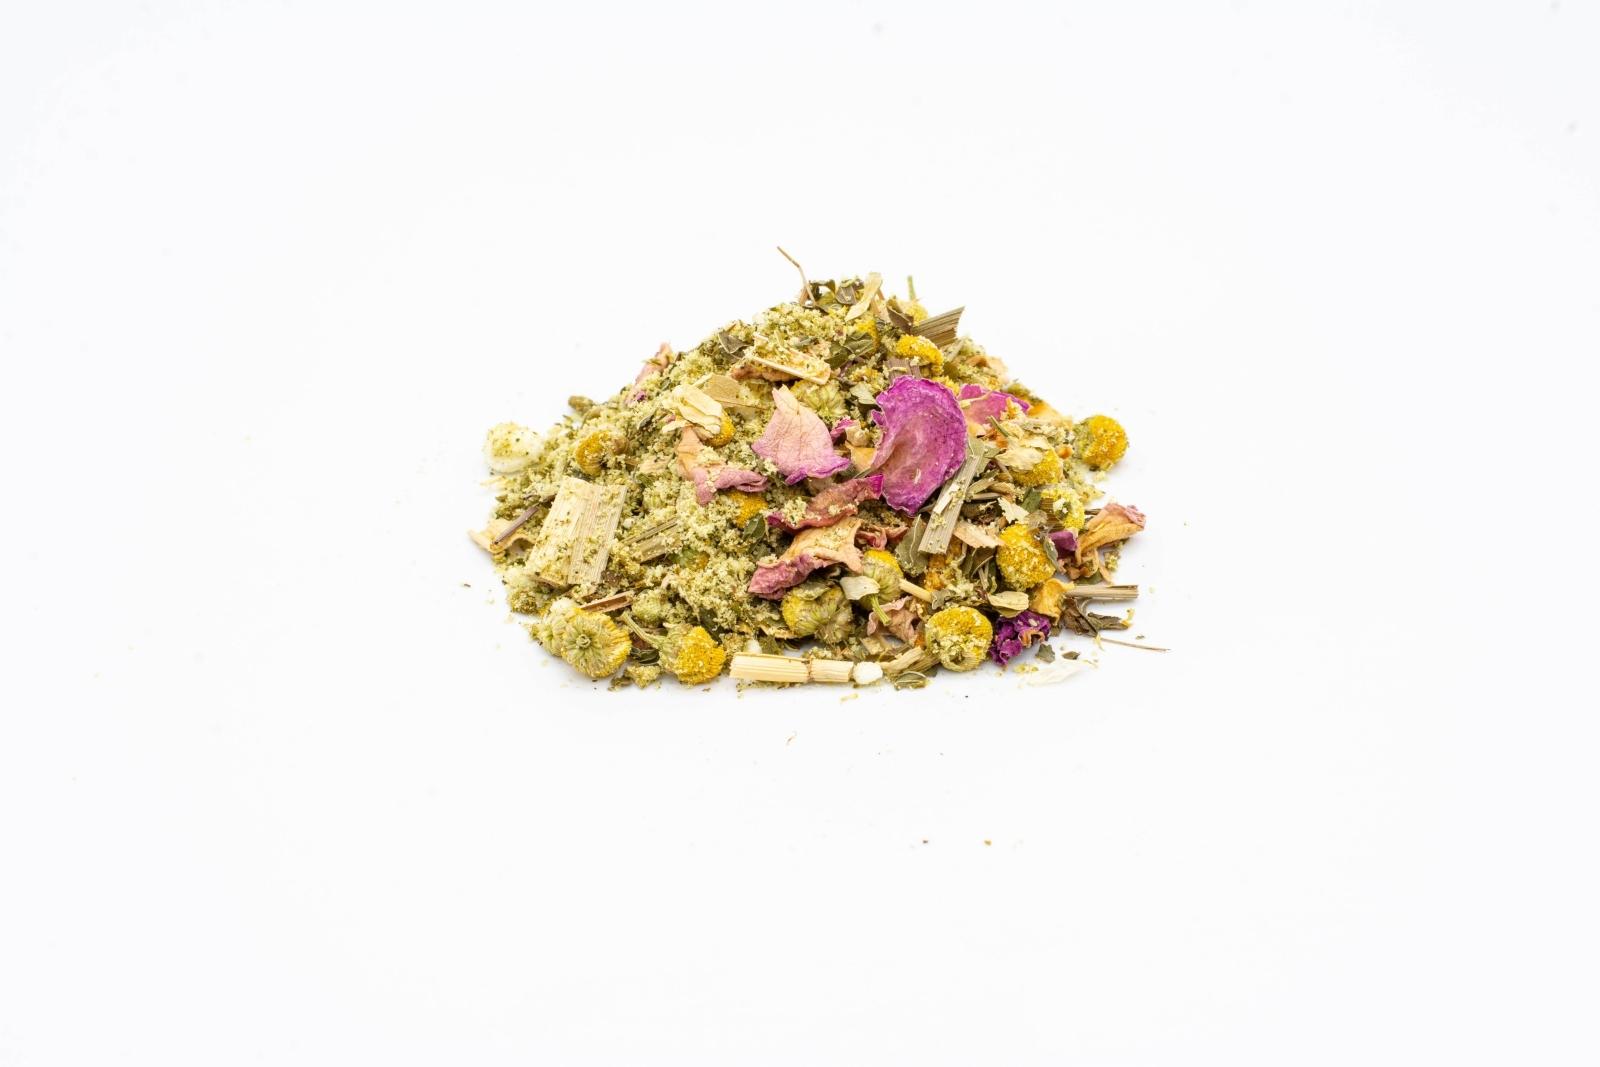 A pile of loose Golden Dream tea by The Brothers Apothecary on a white background